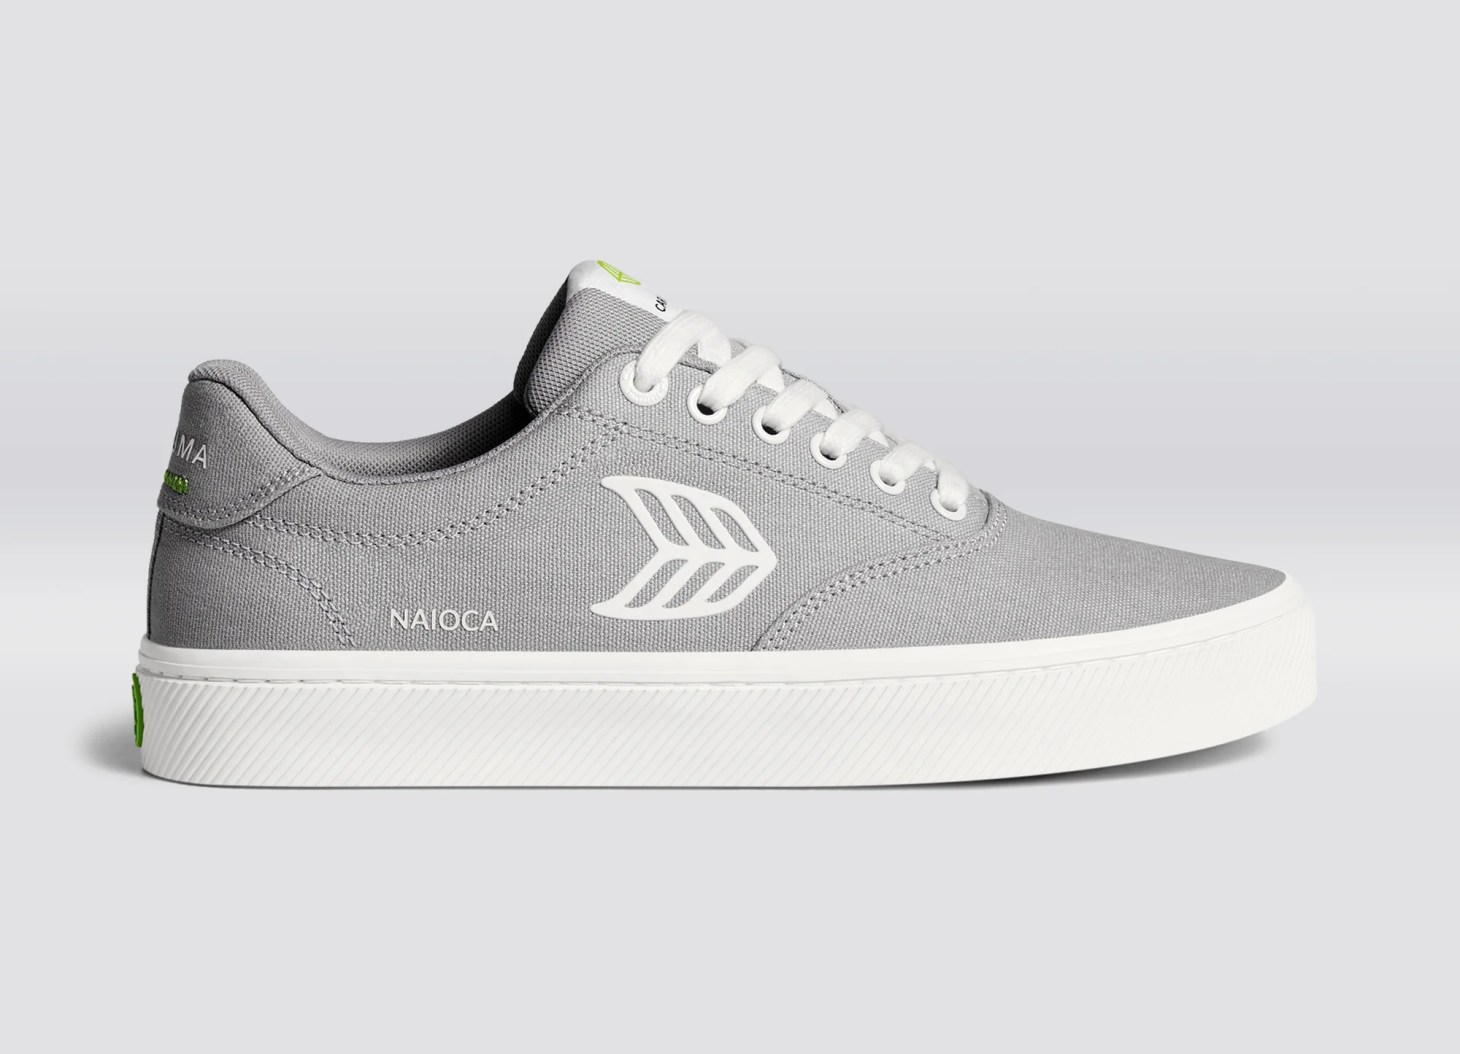 Naioca grey canvas sneakers from cariuma's archive event